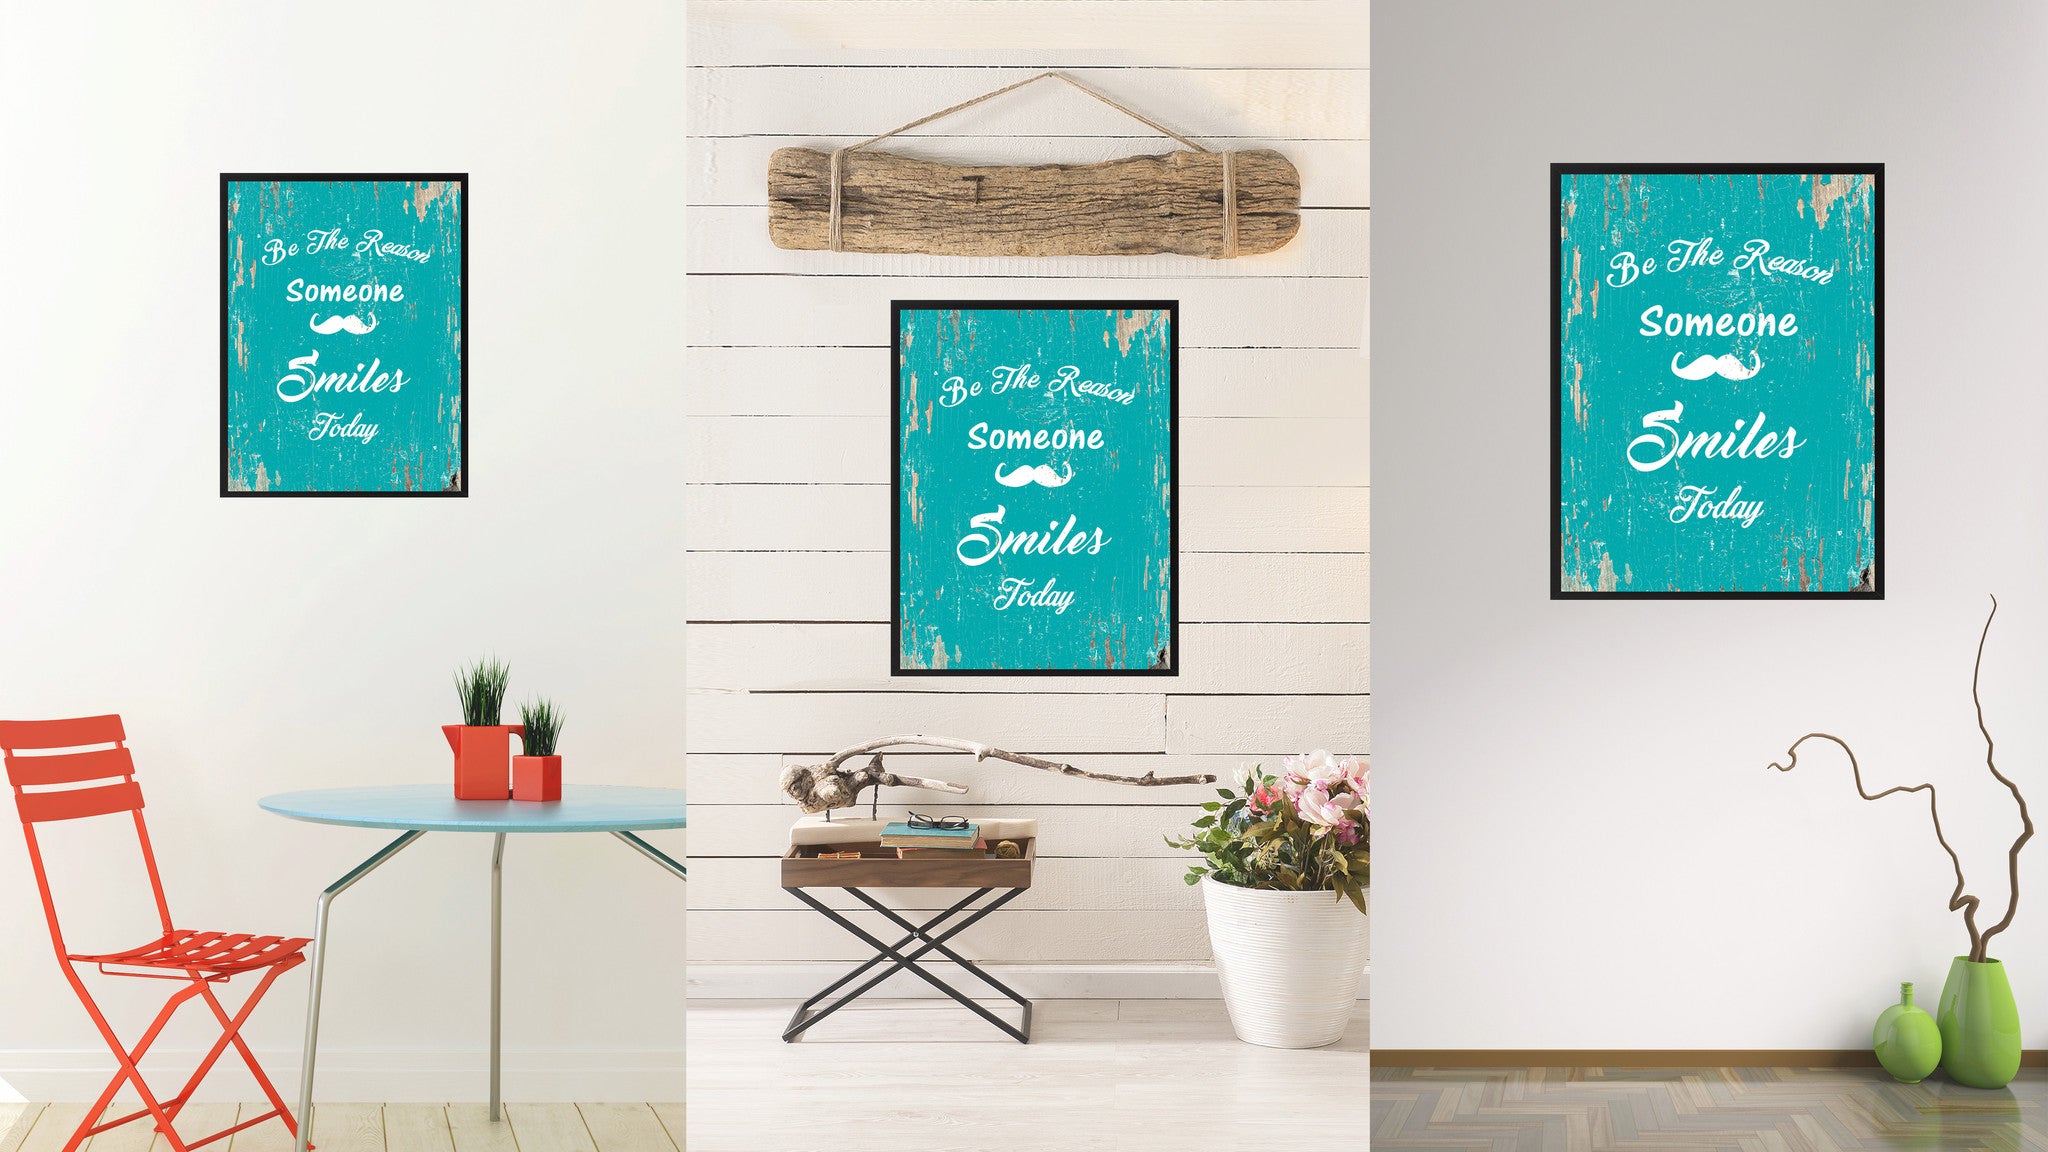 Be the reason someone smiles today Inspirational Quote Saying Gift Ideas Home Decor Wall Art